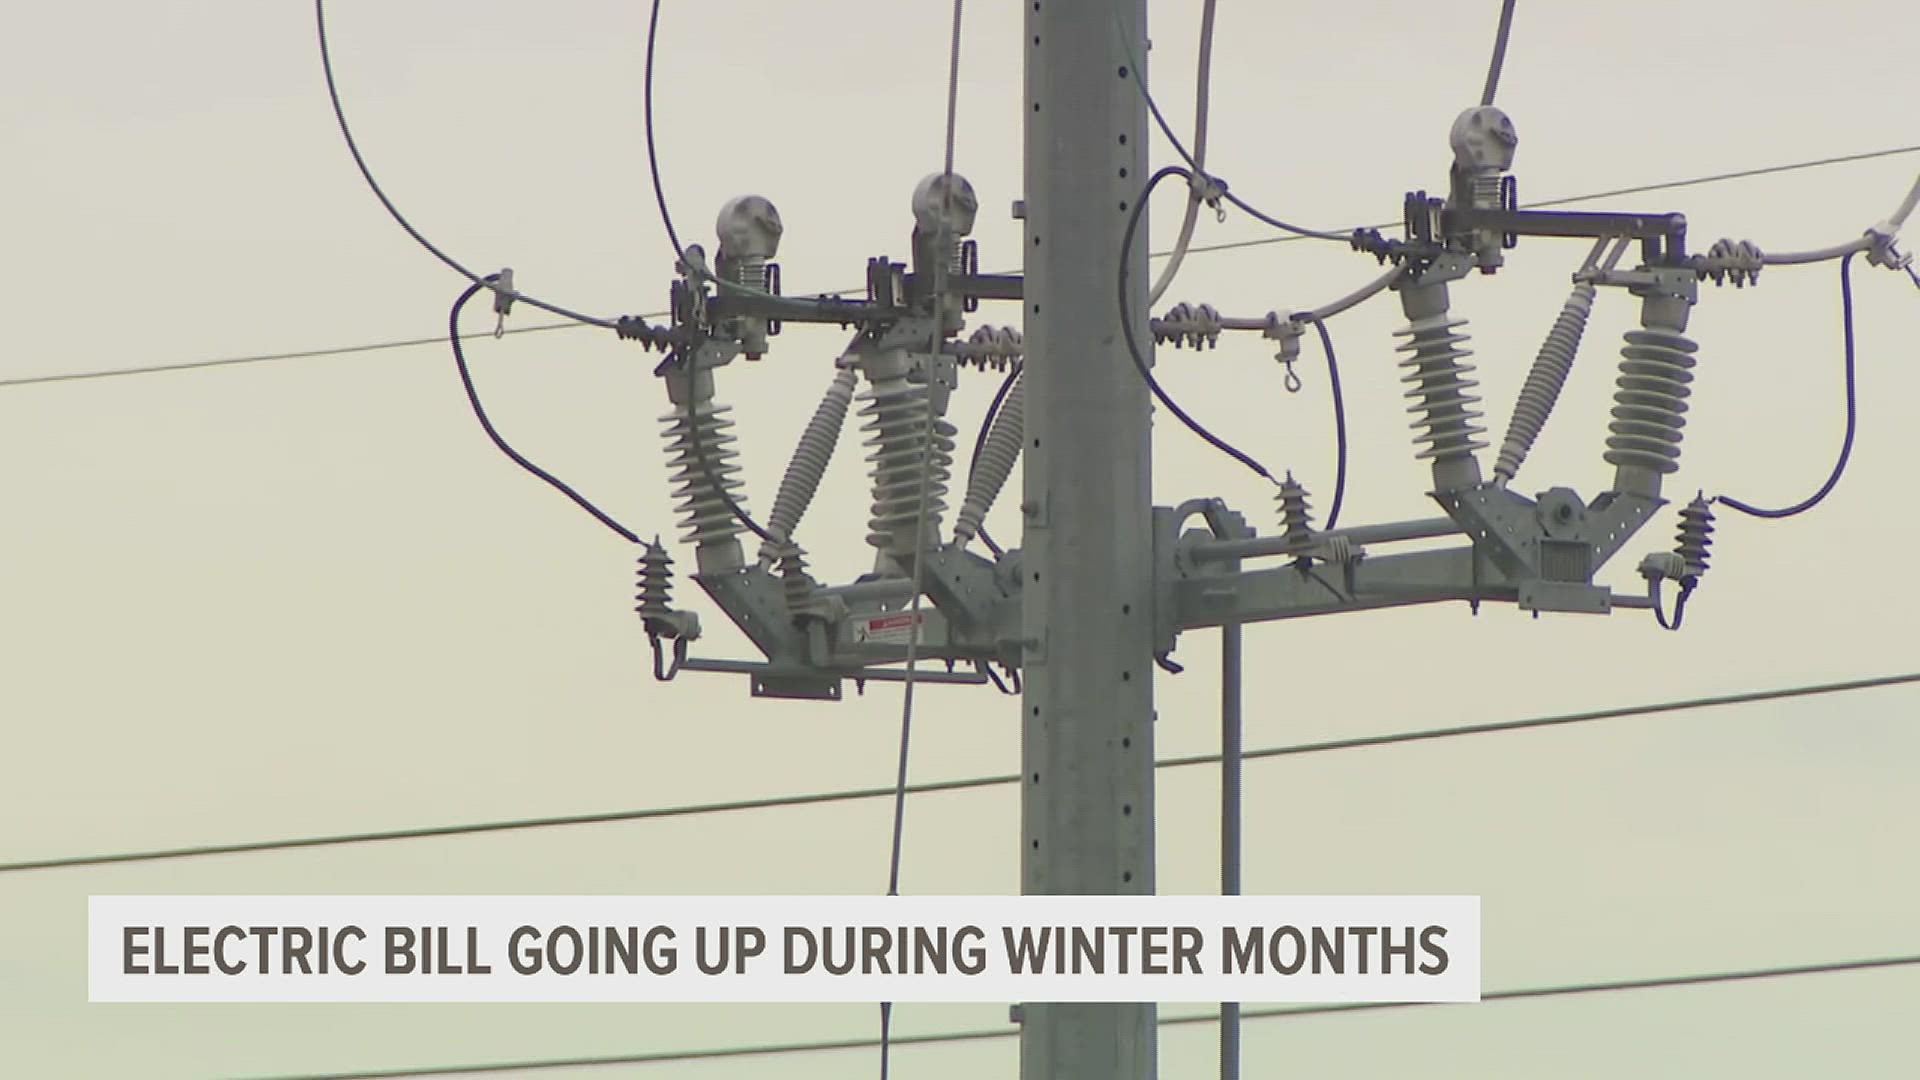 Experts say people can implement some tips to help customers use electricity wisely during the cold winter months.